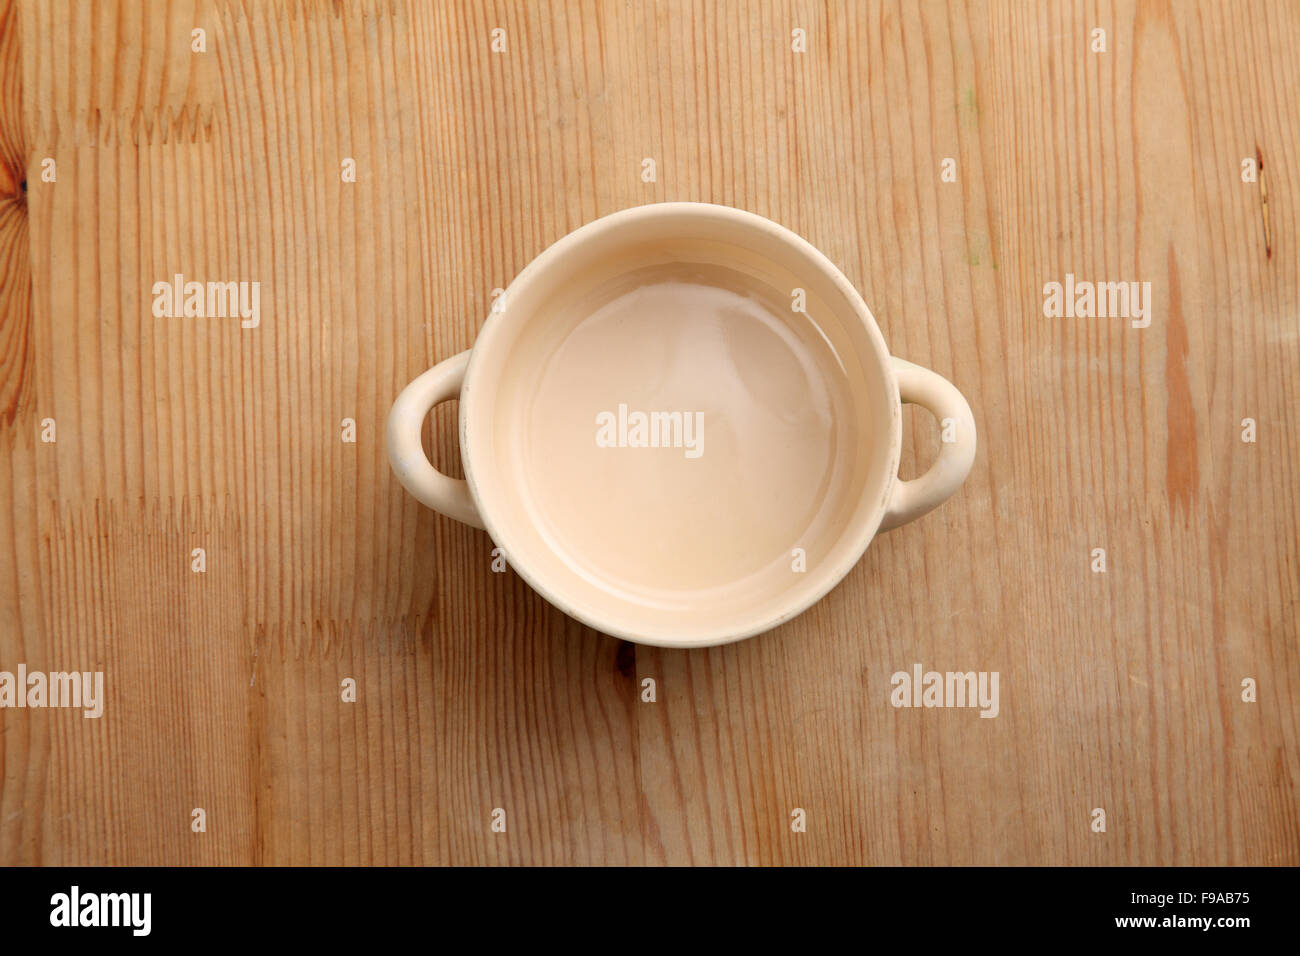 brown color soup bowl with handle Stock Photo